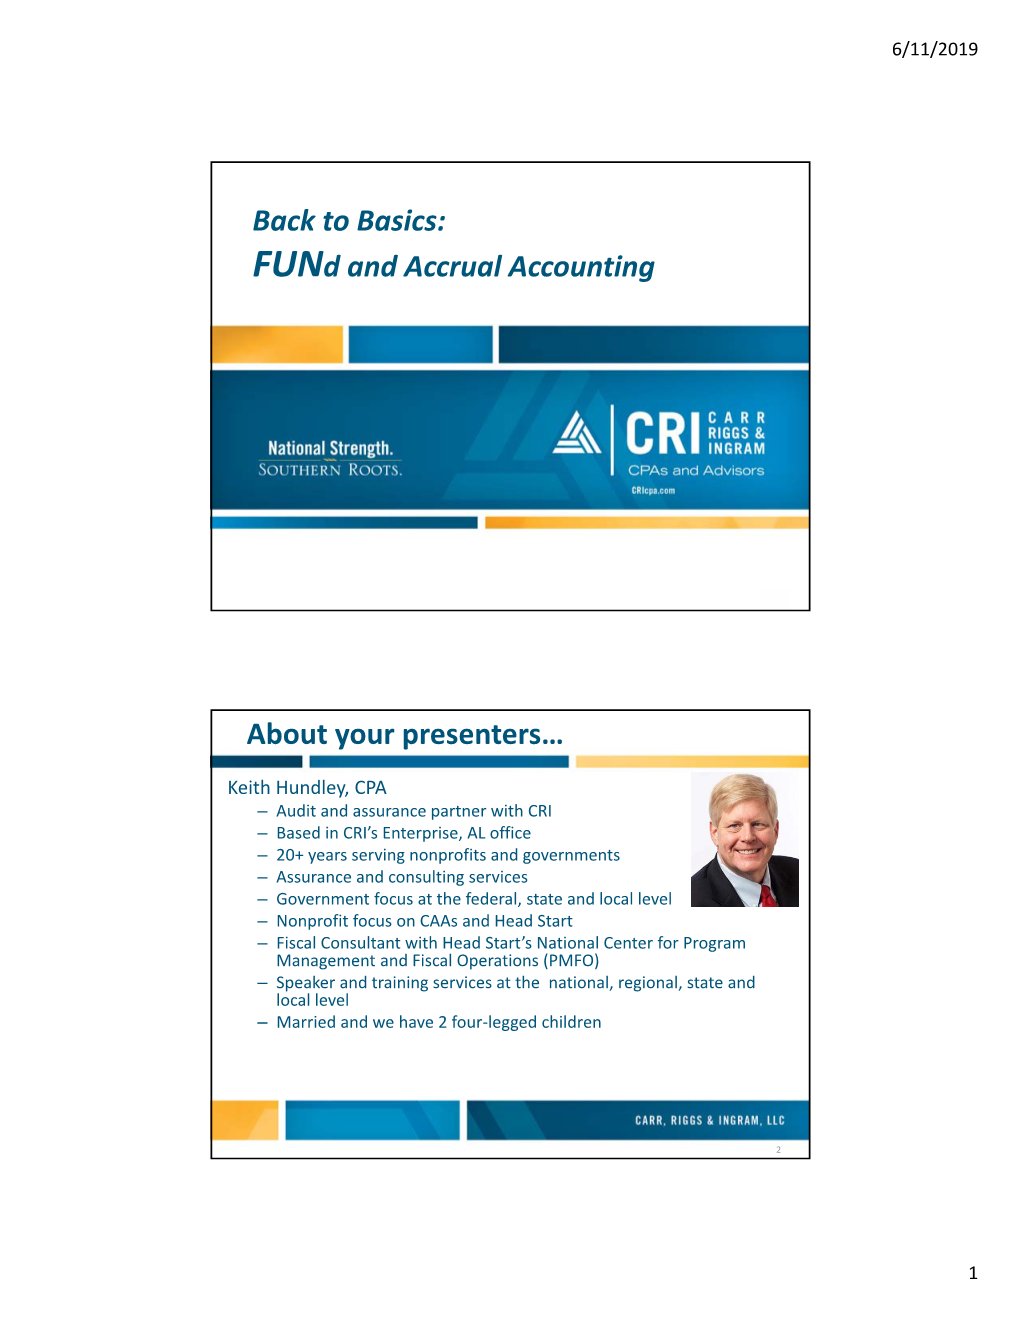 What Is Fund Accounting